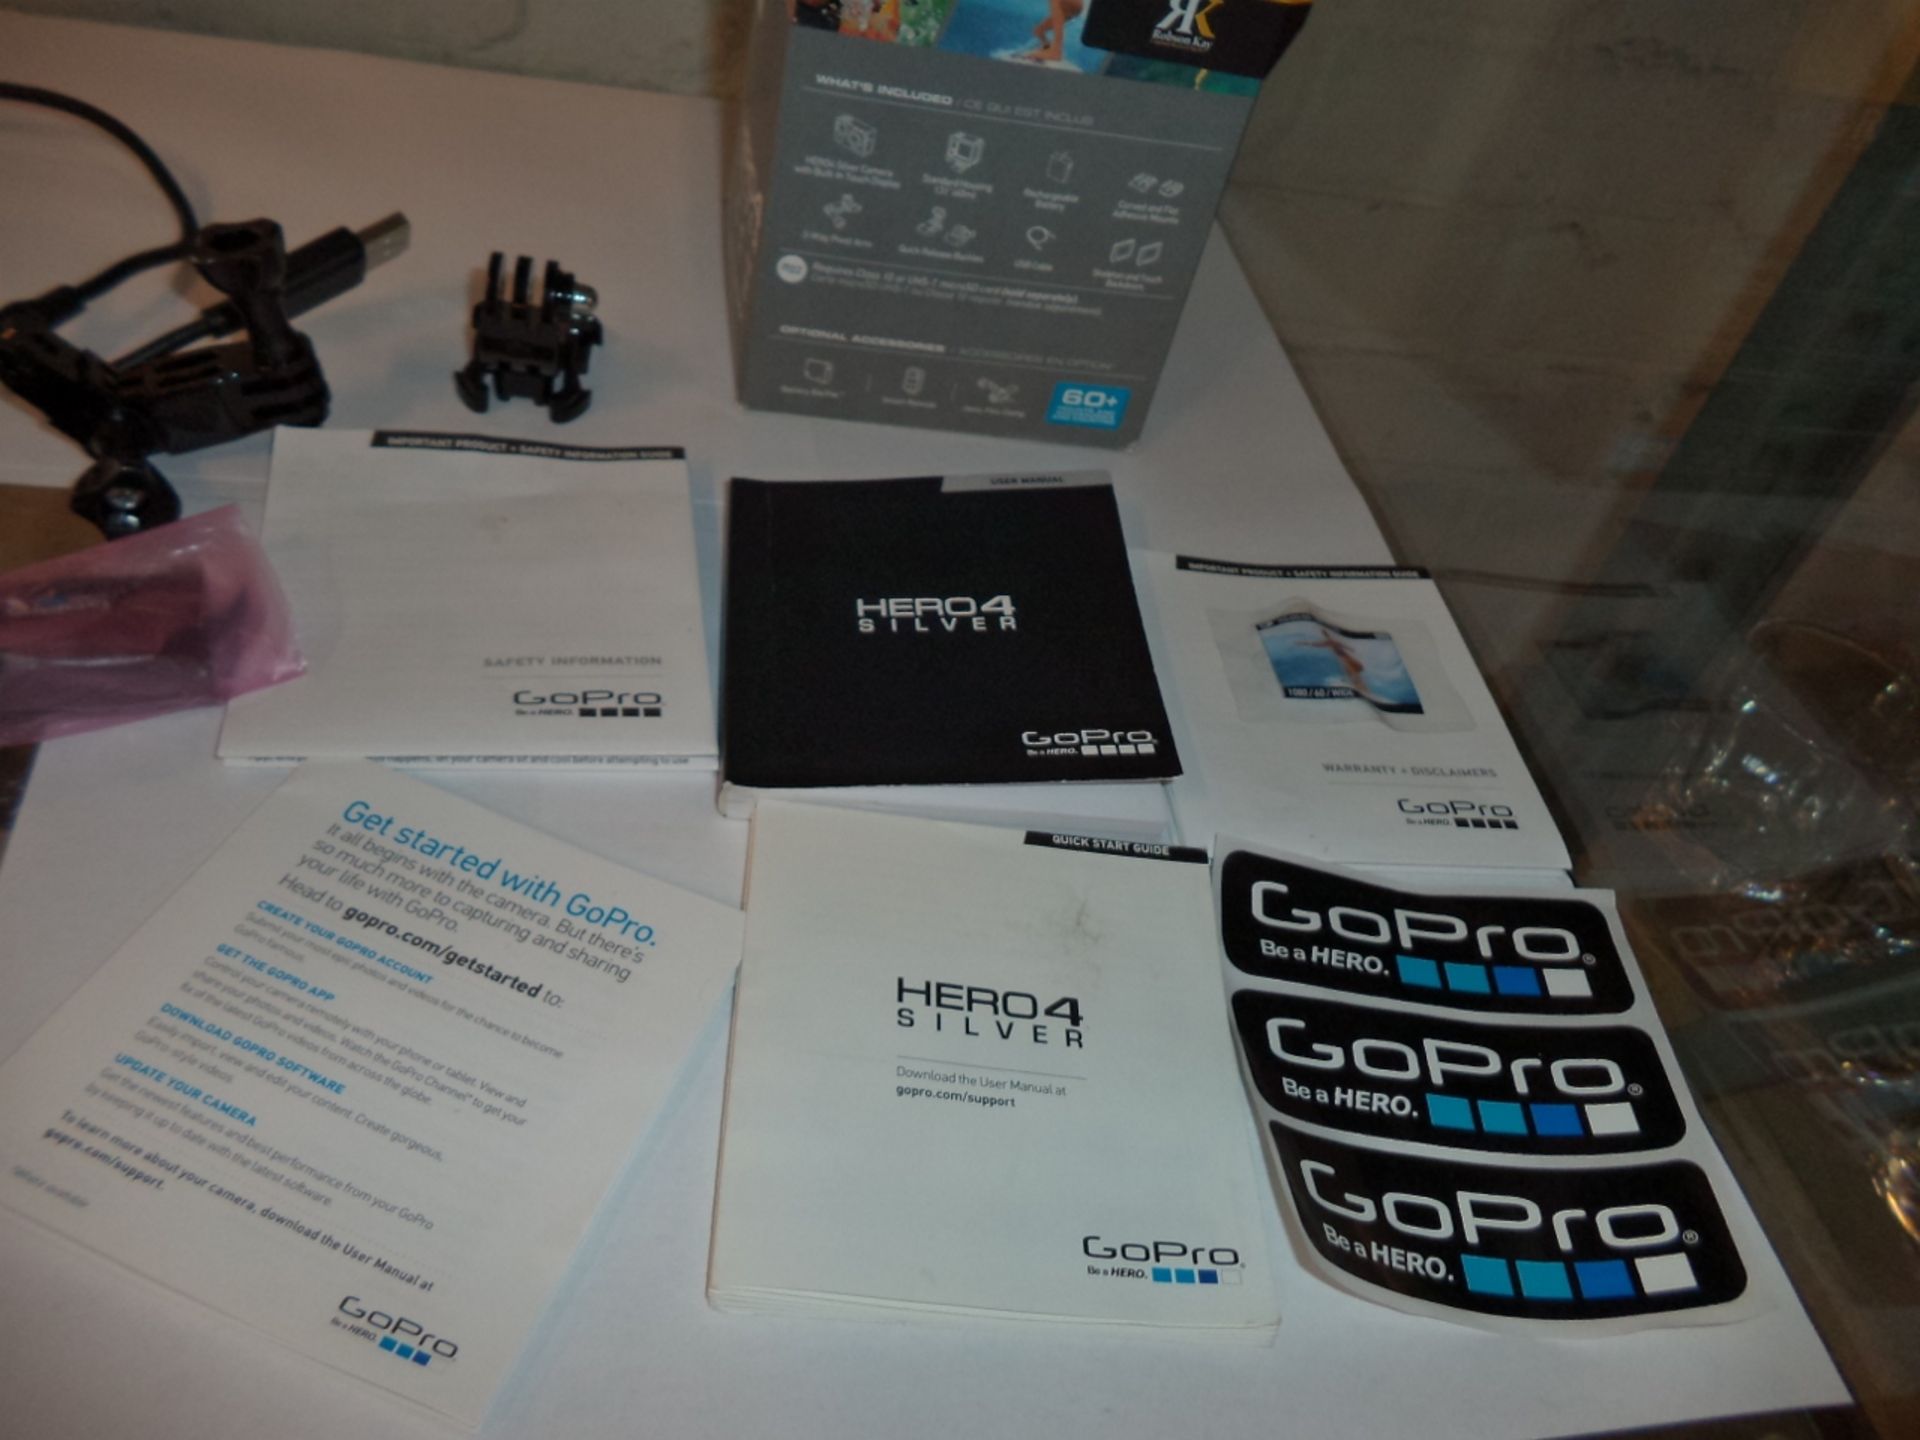 GoPro HERO4 Silver edition action video camera with built-in touchscreen display, box, manuals and - Image 10 of 11